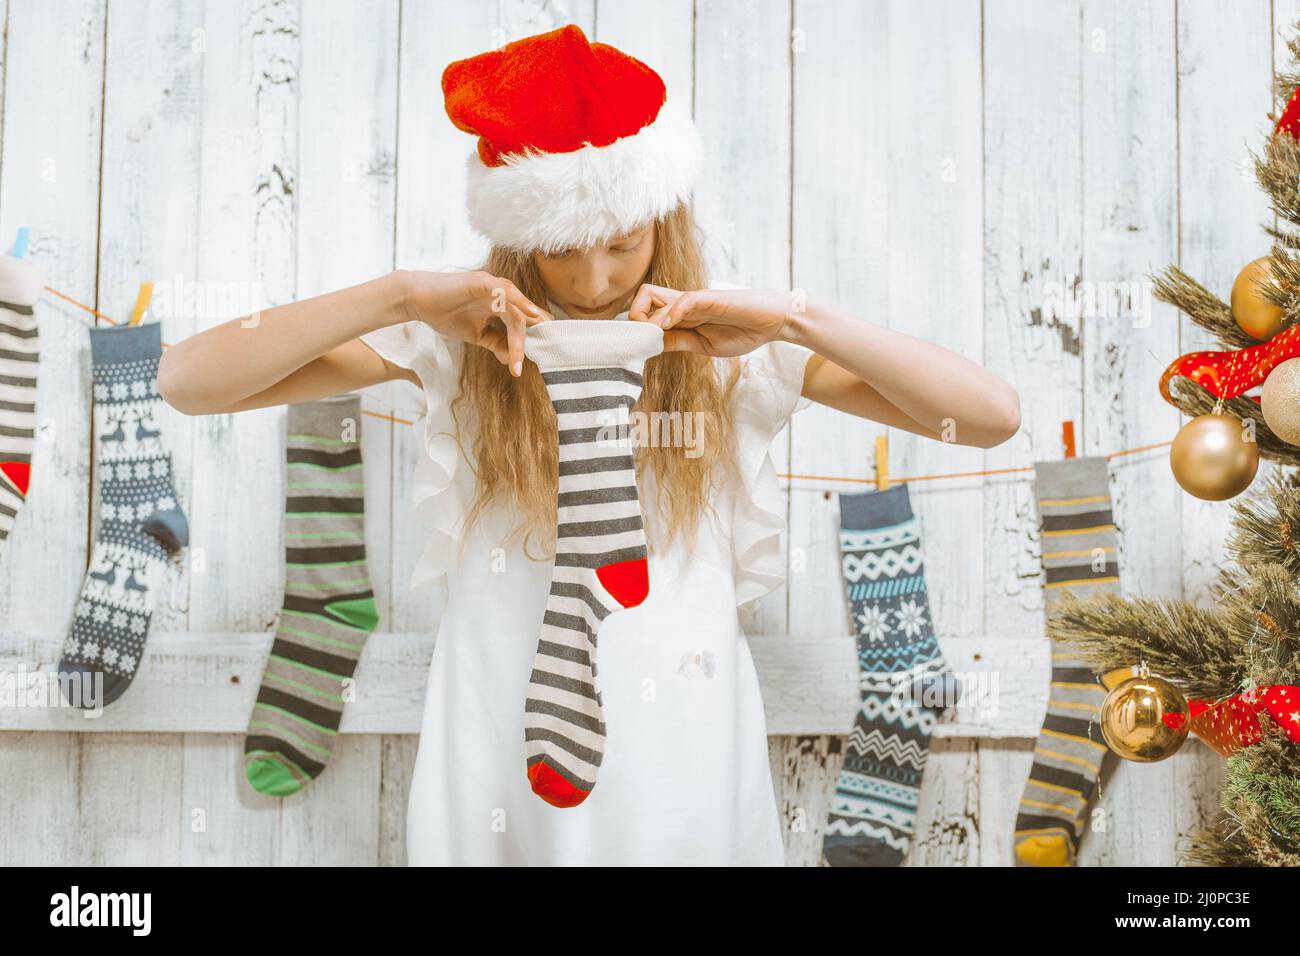 Christmas Stockings. Curious Girl in a White Dress and a Santa Hat on her Head Looks into an Empty Striped Sock. Close-up Stock Photo